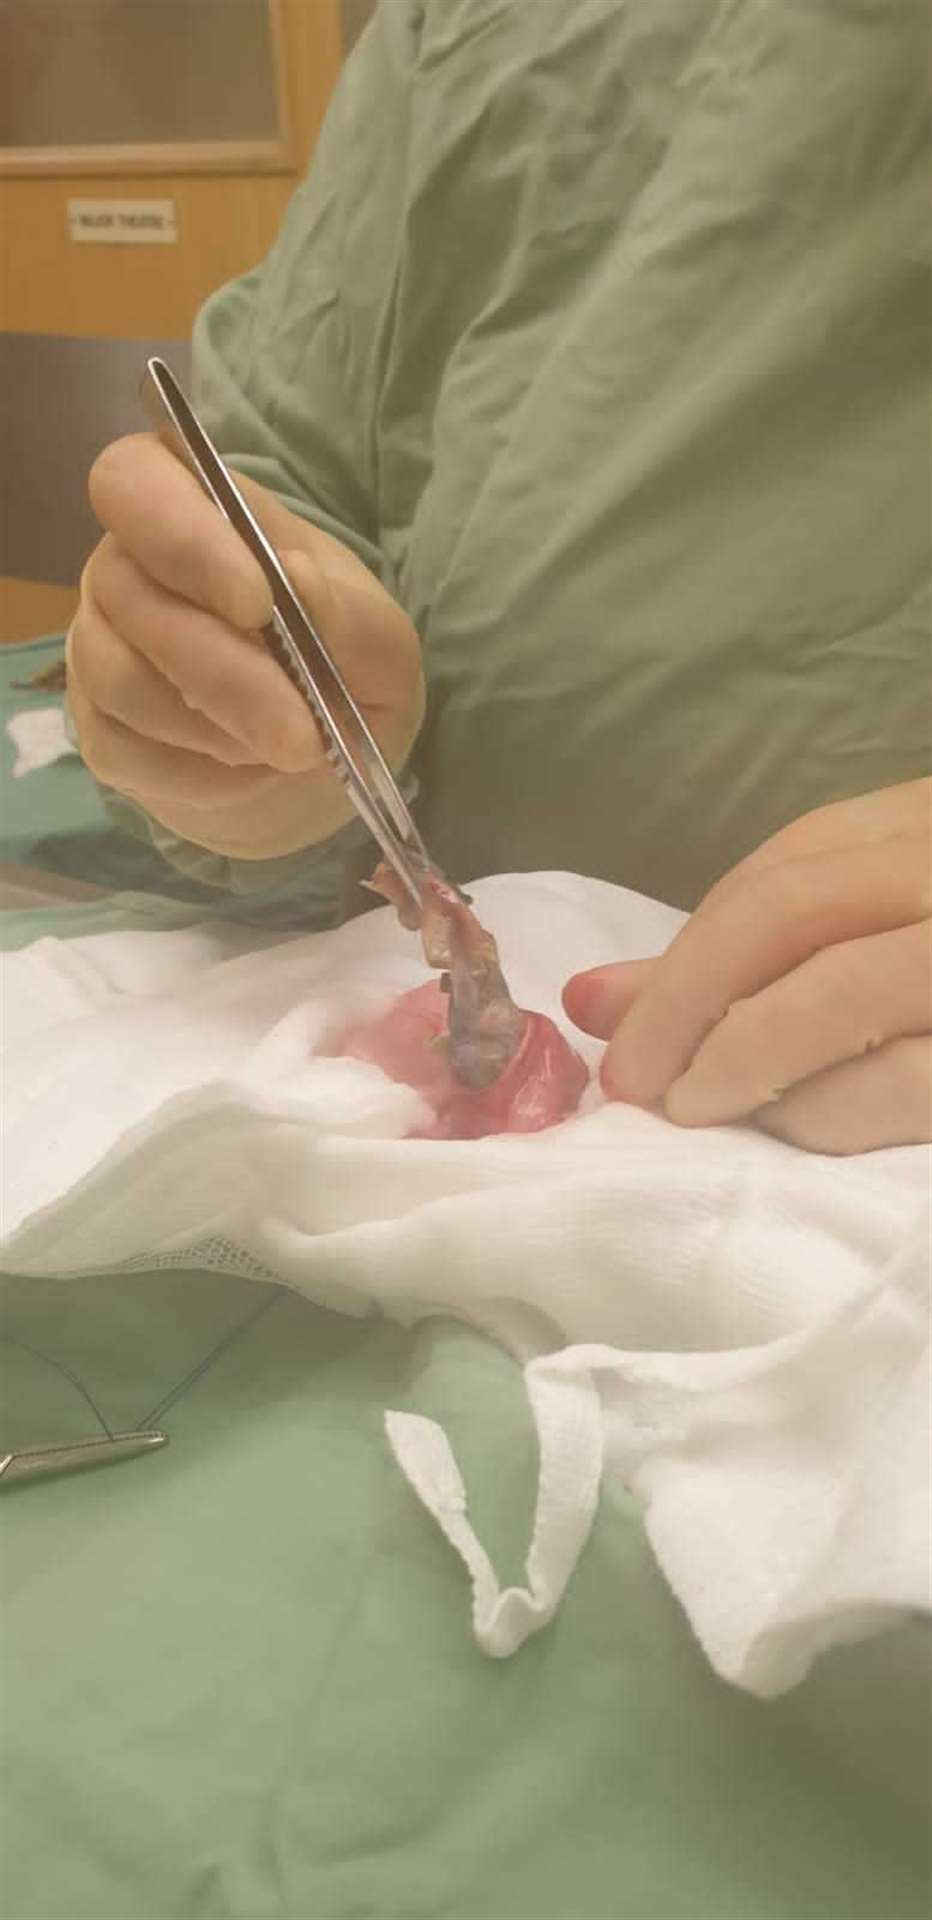 A vet removing the hairbands